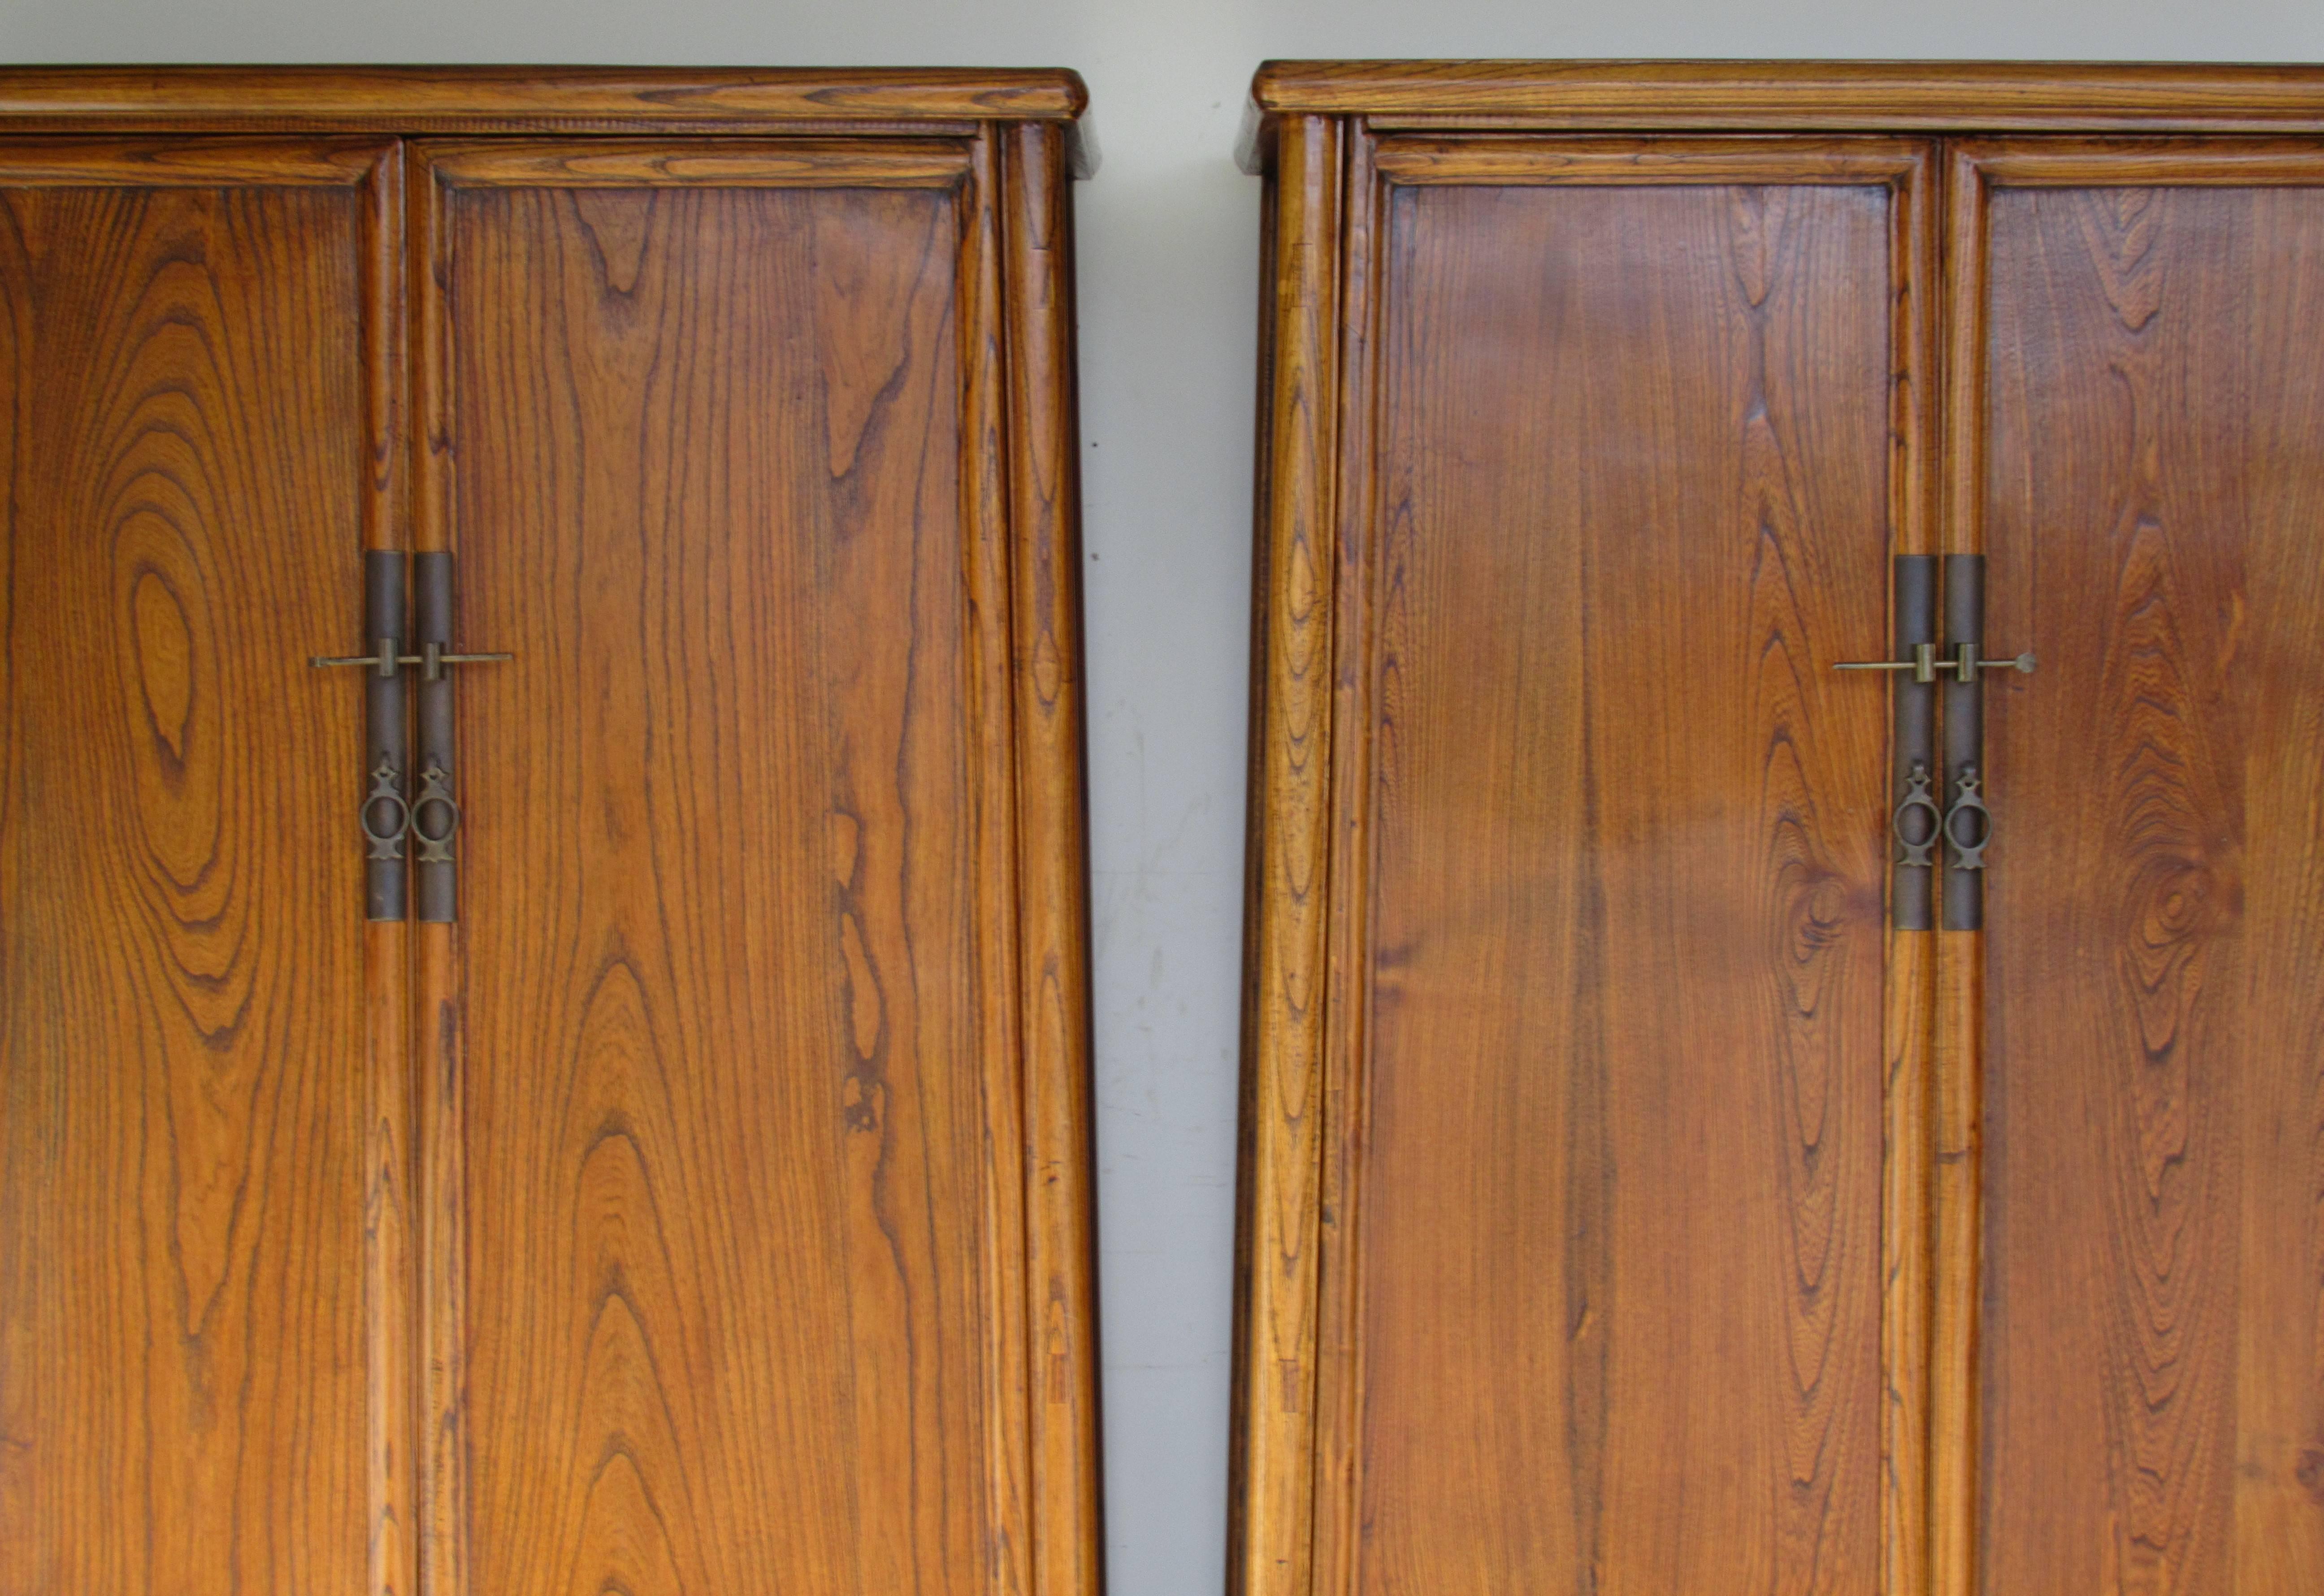 A pair of antique 19th century Chinese hardwood elm cabinets with two doors / two drawers / fine bronzed brass hardware / rounded corners / shelved interior / mortised construction and a sloping tapered form. Exceptional quality with beautiful